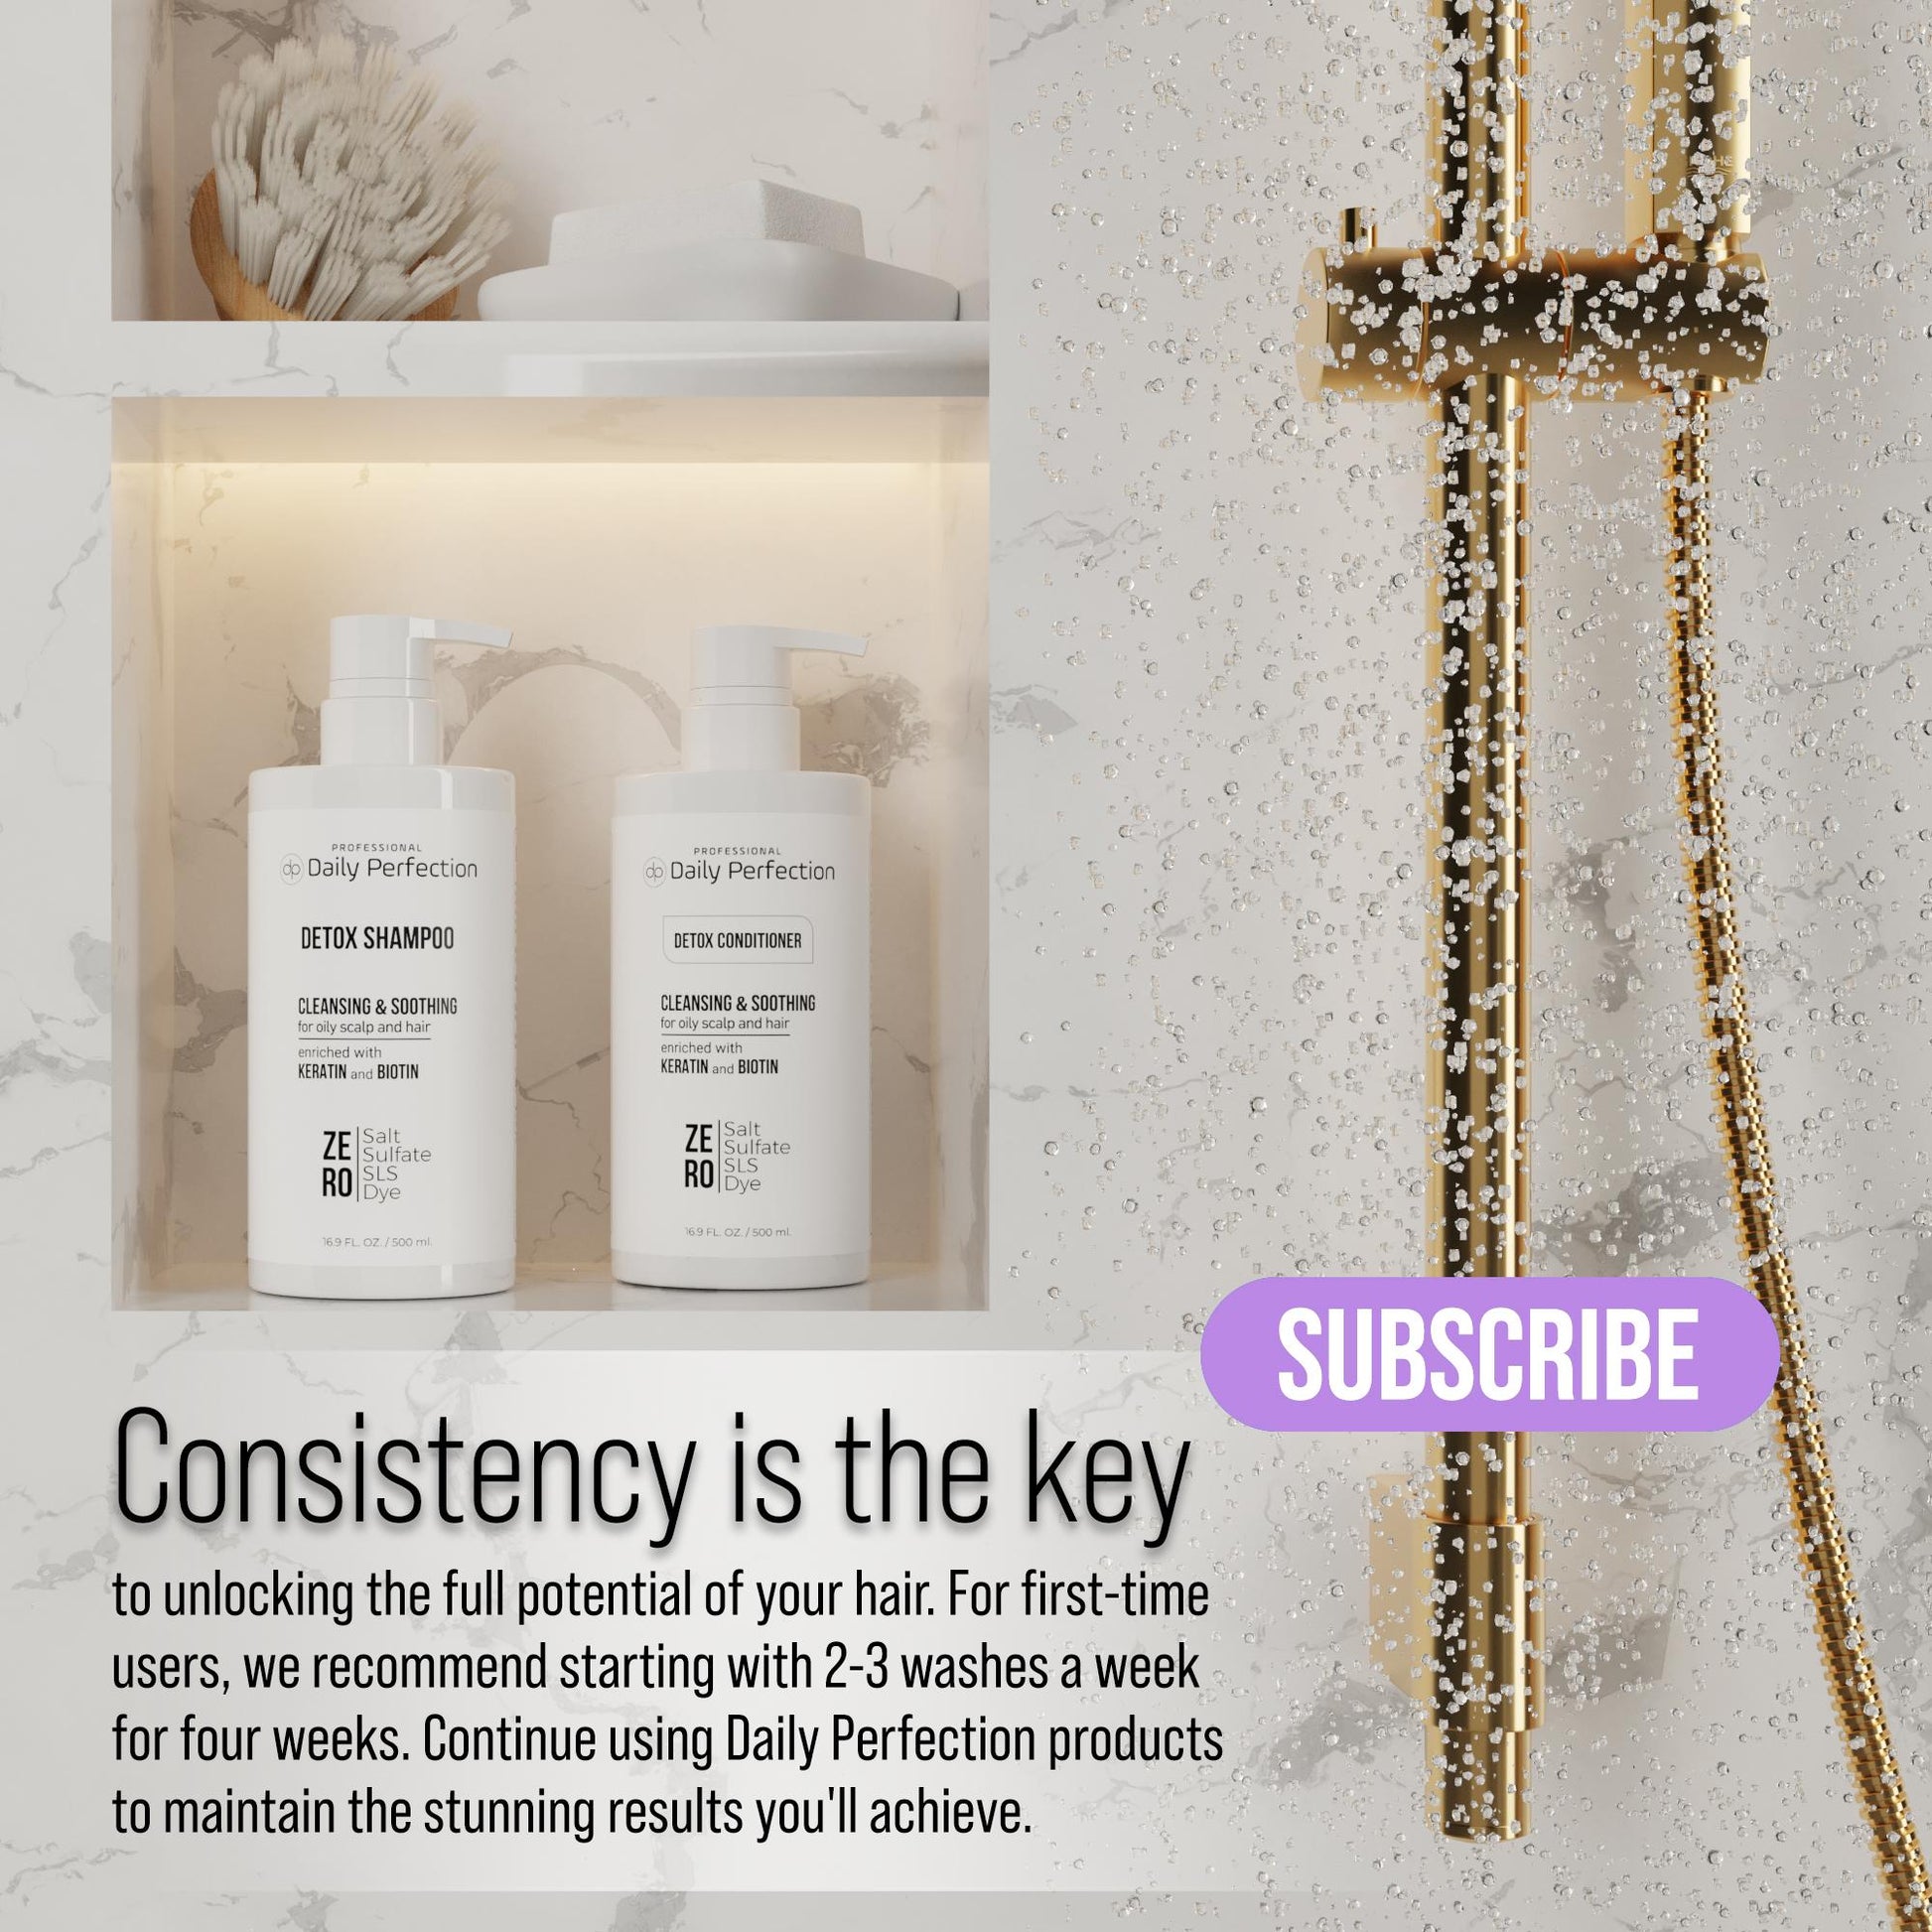 lifestyle image in a shower with a message that explains the importance of consistency in using hair care products along with  the product bottle of Daily Perfection Detox Shampoo